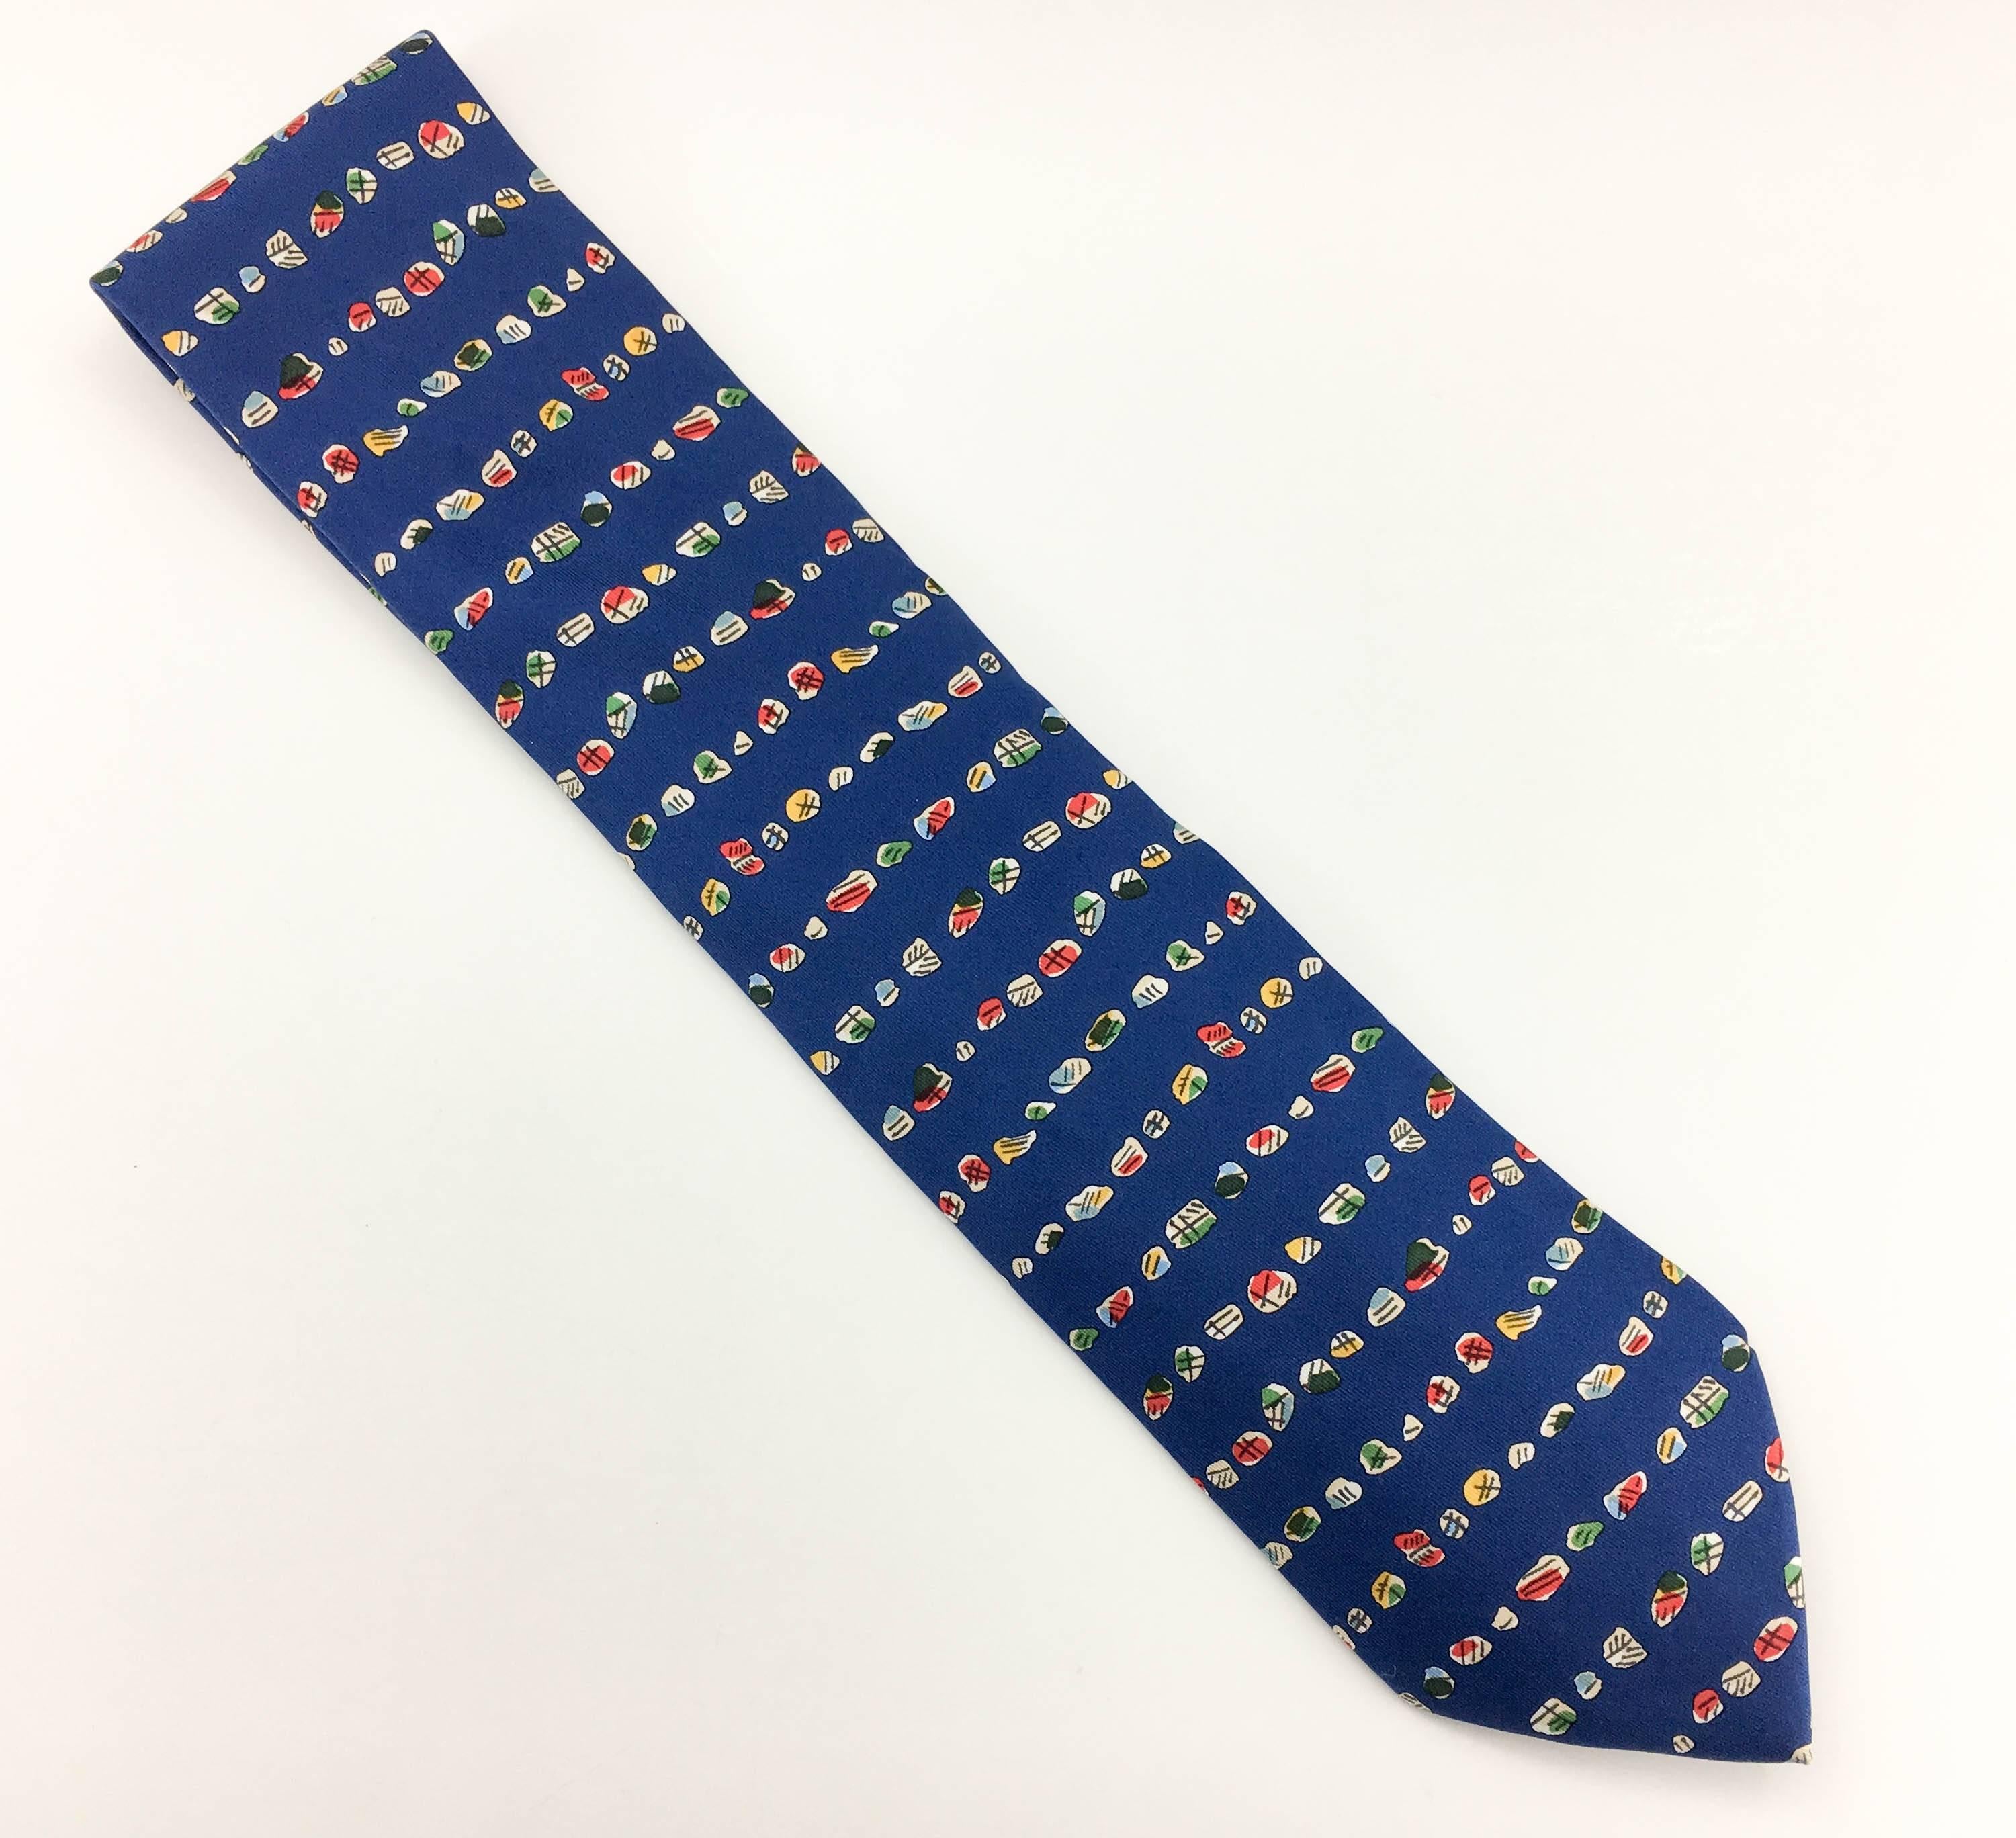 Stylish Hermes Silk Tie. Made in pure silk, this numbered print (7832 UA) on a blue background features various abstract designs. This is a classy way to some fun to a suit. 

Label/Designer: Hermes
Period: 21st Century
Origin: France
Material: